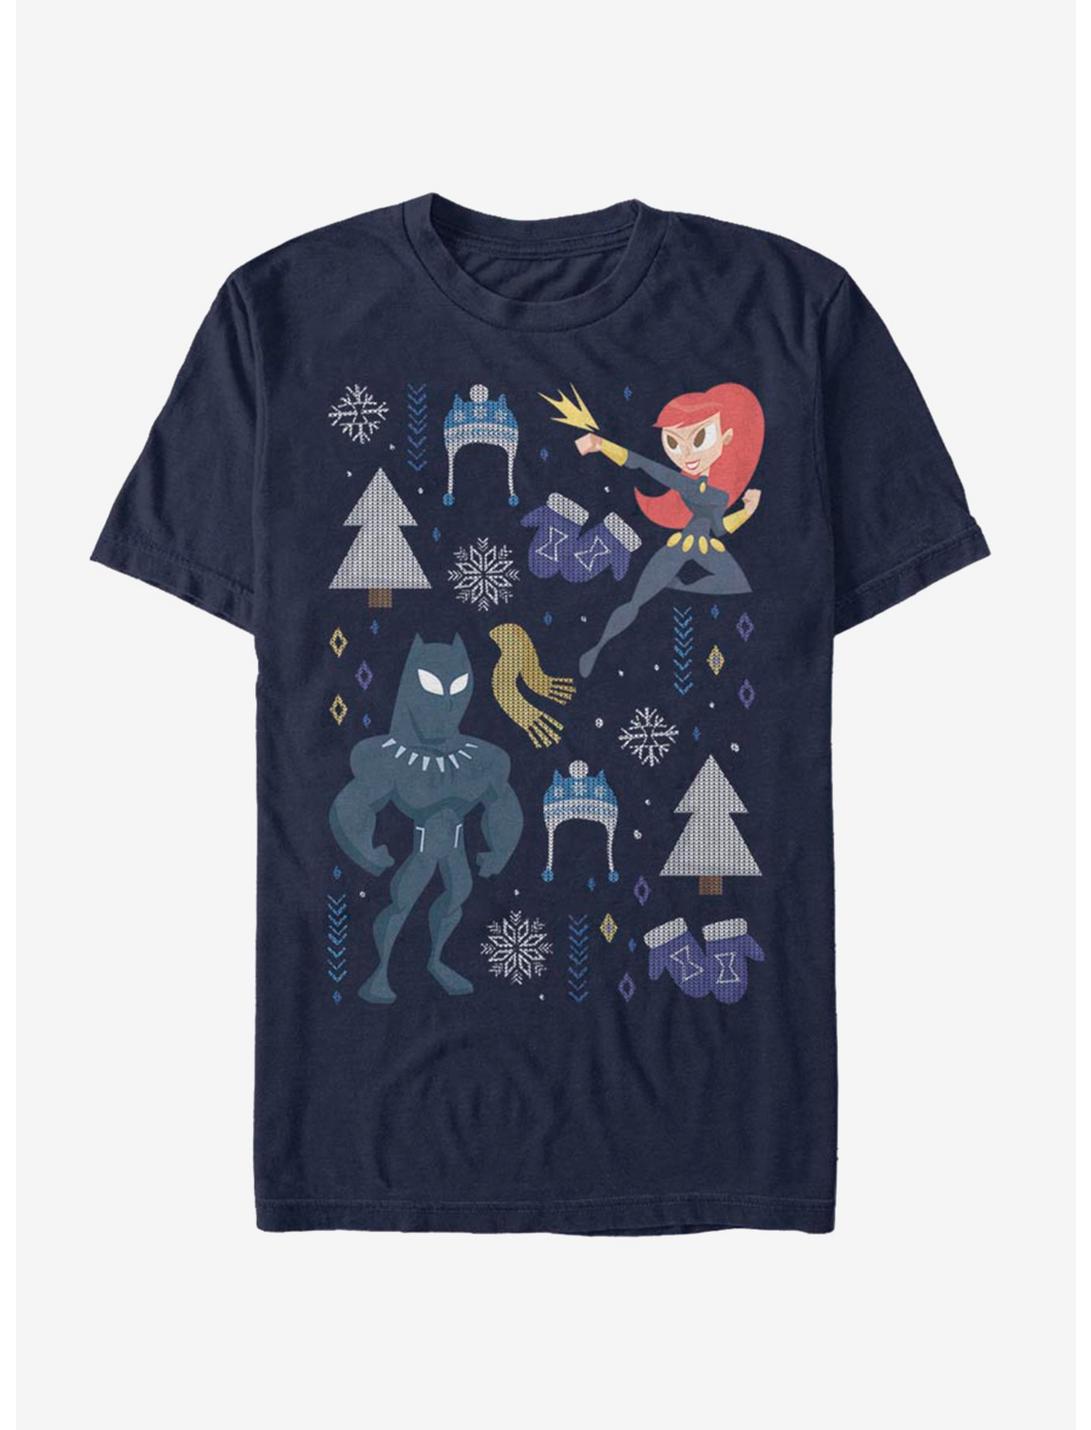 Marvel Black Panther Christmas Icons T-Shirt, NAVY, hi-res